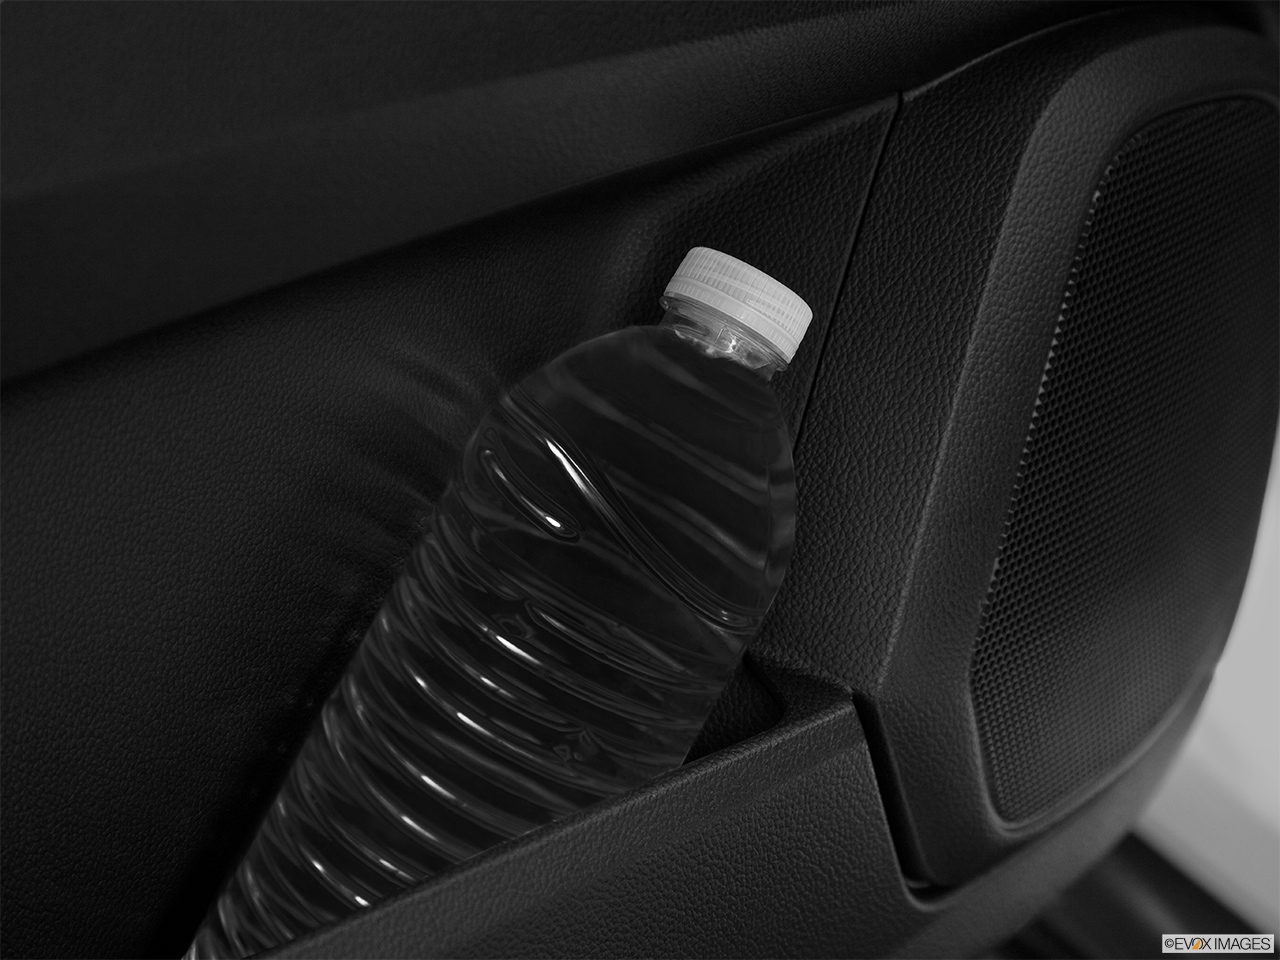 2014 Cadillac SRX Luxury Cup holder prop (tertiary). 